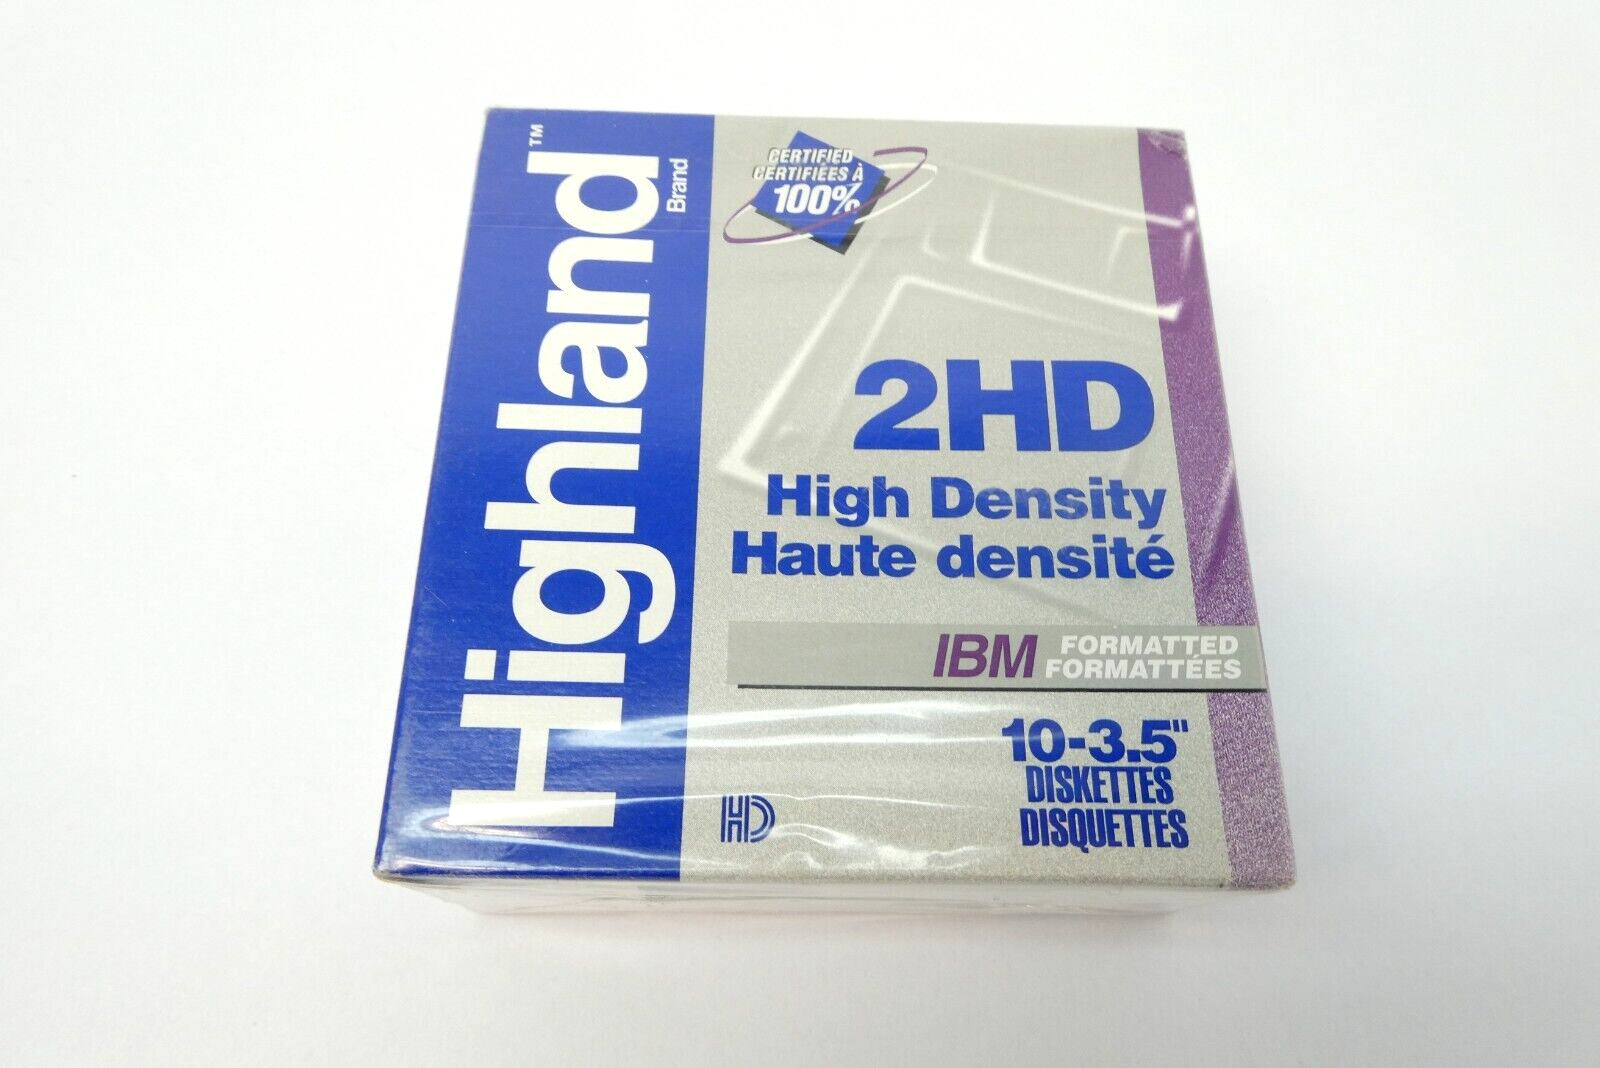 New Highland 2HD High Density IBM Formatted 10-3.5” Diskettes 0-51111-44766-6